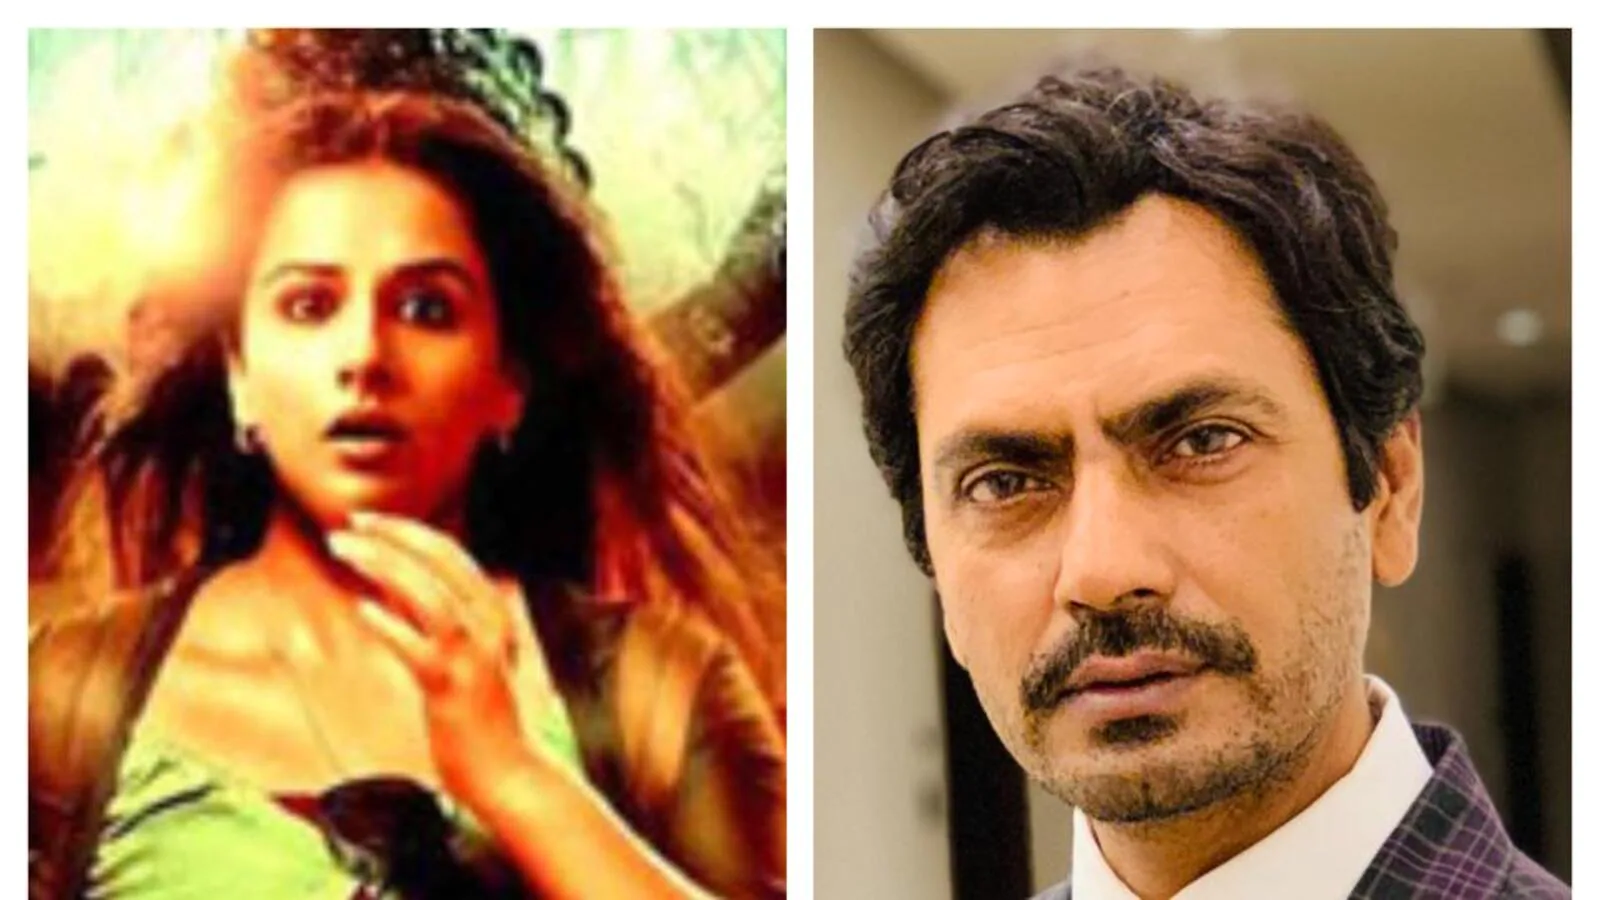 Nawazuddin Siddiqui on 10 years of Kahaani: After I did this film, there was no looking back for me